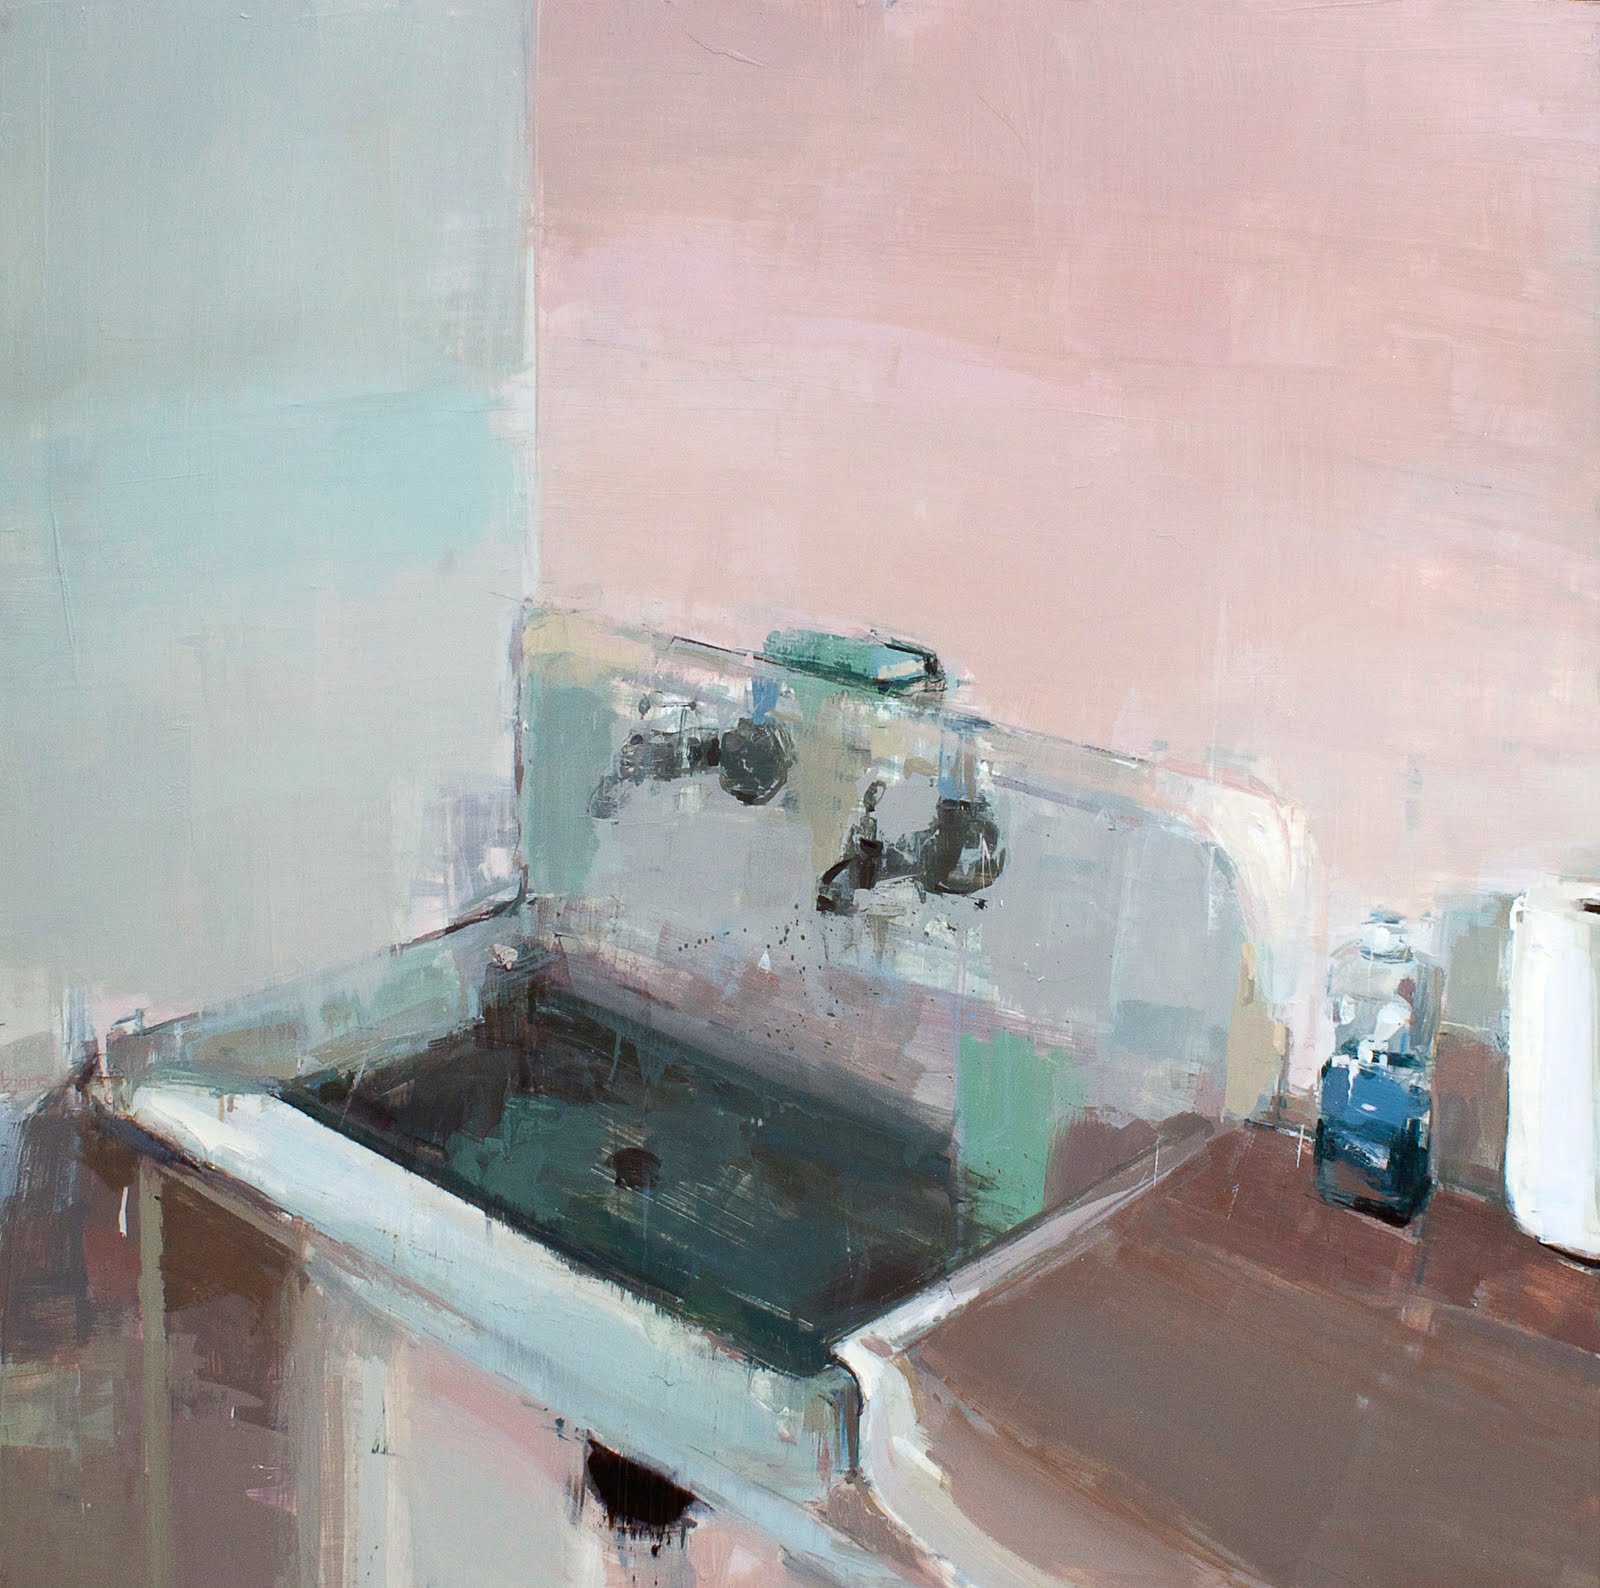 Chelsea James, "Utility Sink," 36 x 36 inches, Oil on panel